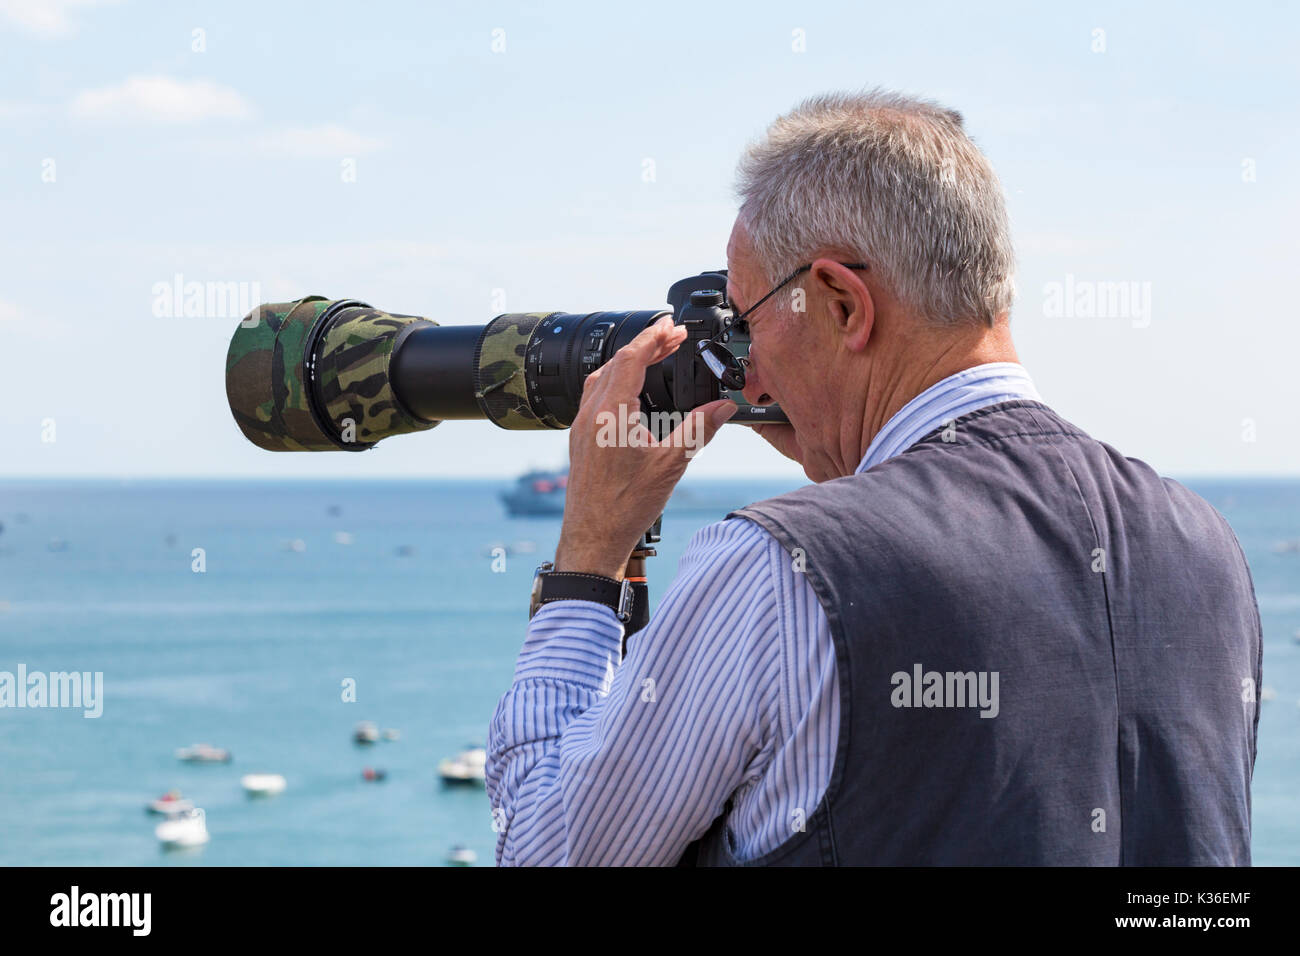 Bournemouth, UK. 1st Sep, 2017. The second day of the tenth anniversary of the Bournemouth Air Festival. Photographer ready to capture the action Credit: Carolyn Jenkins/Alamy Live News Stock Photo